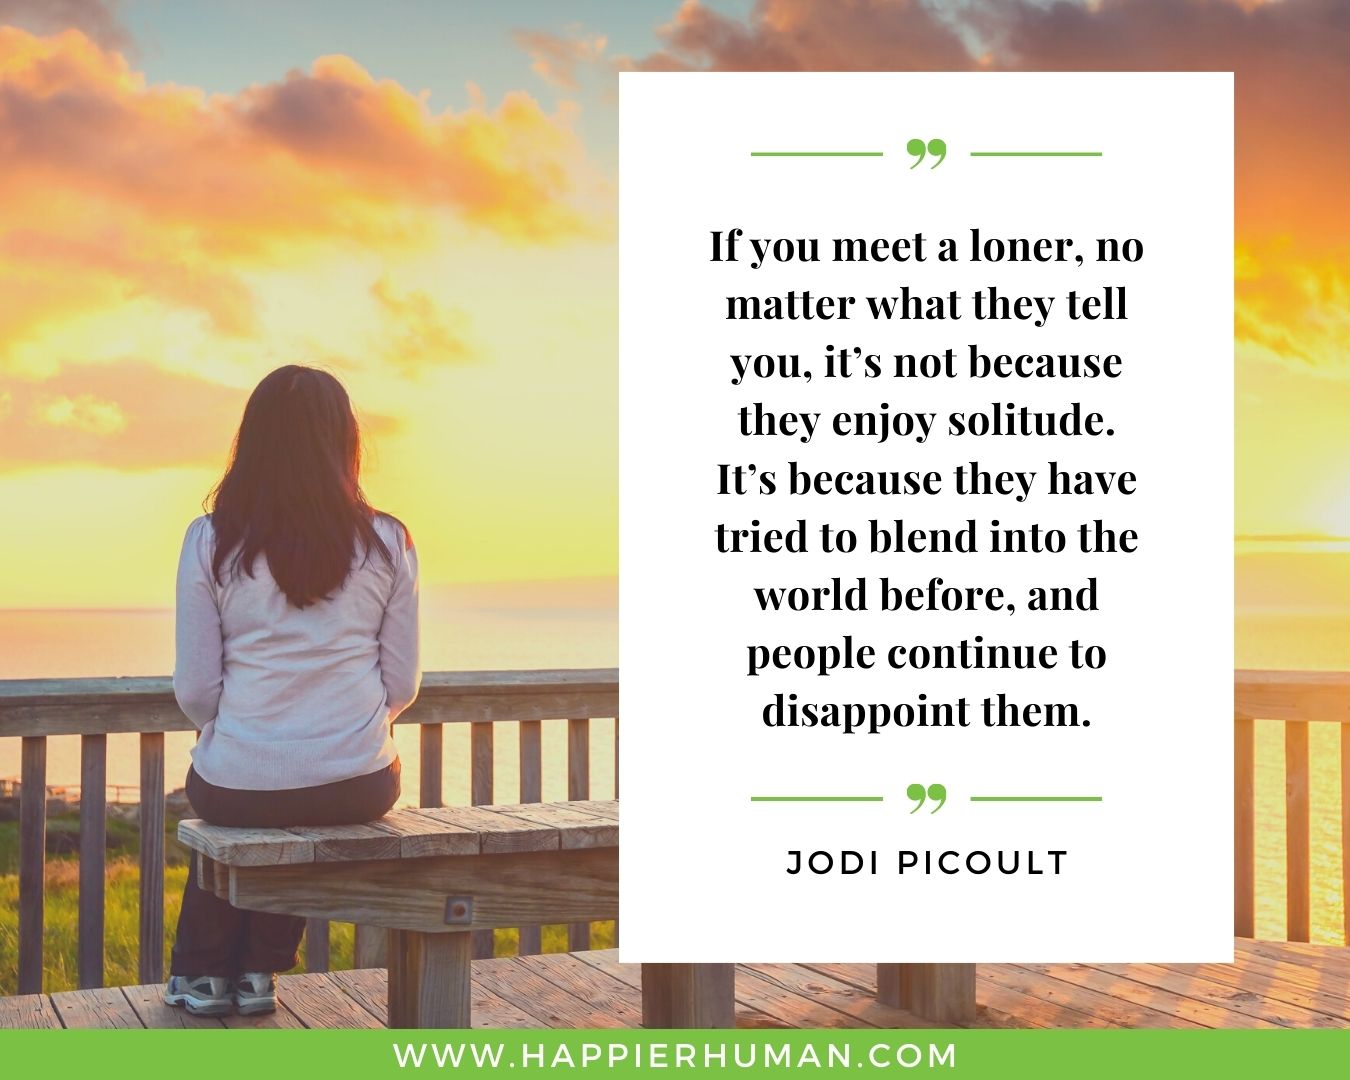 Introvert Quotes - “If you meet a loner, no matter what they tell you, it’s not because they enjoy solitude. It’s because they have tried to blend into the world before, and people continue to disappoint them.” – Jodi Picoult